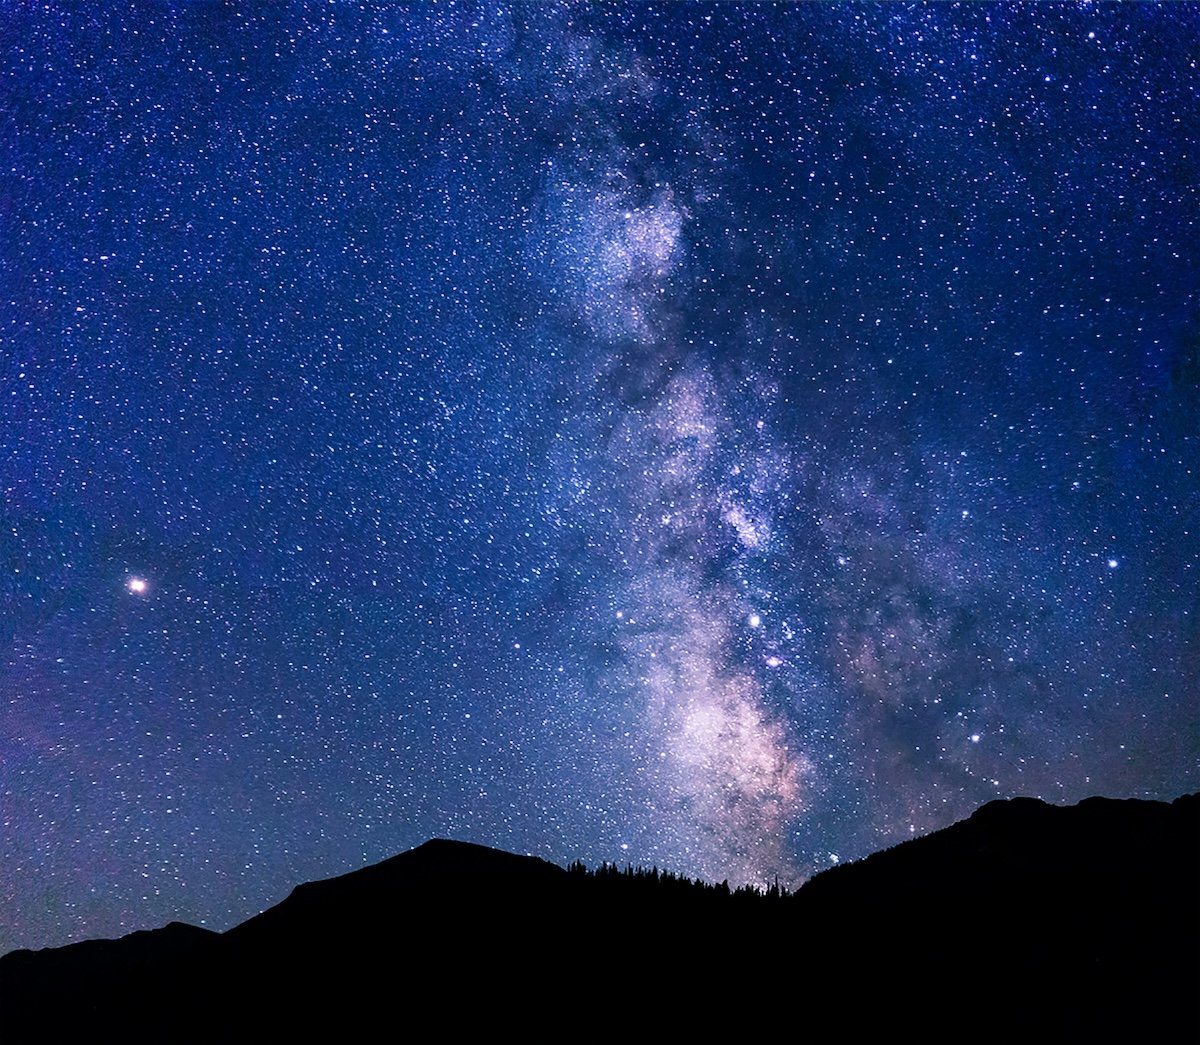 A night sky time-lapse photo of the Milky Way with a mountain silhouette